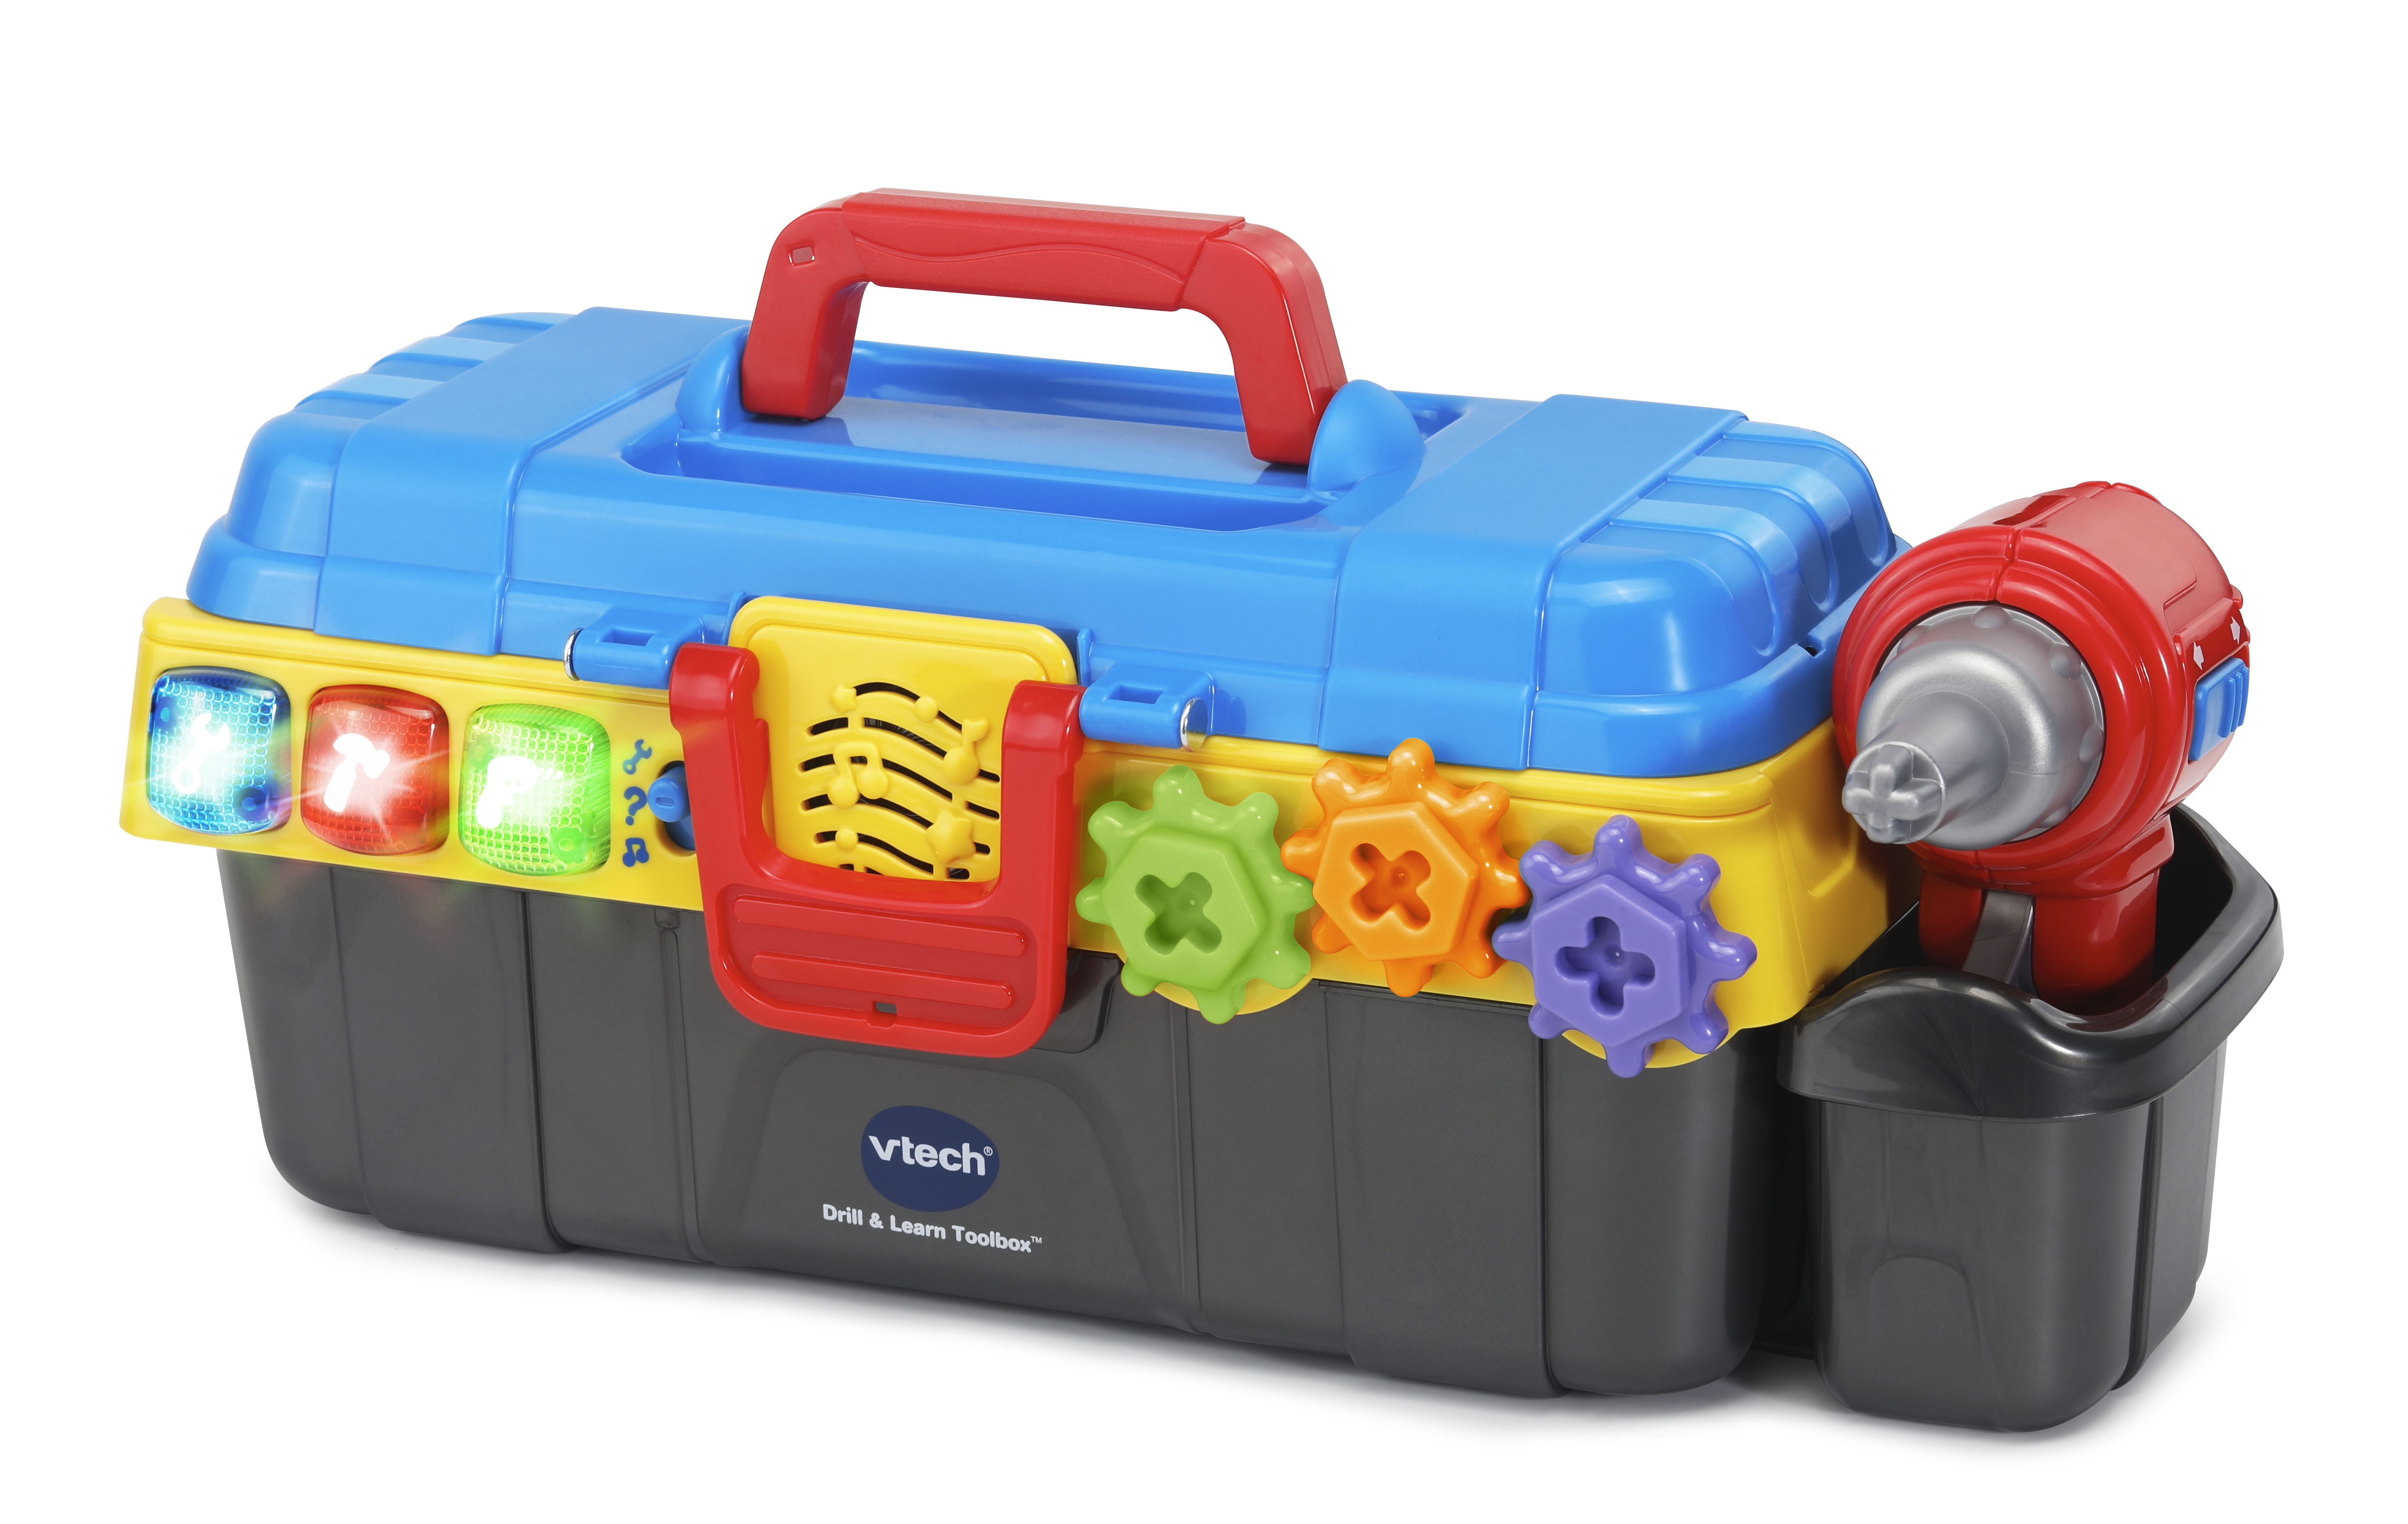 vtech drill and learn toolbox replacement parts